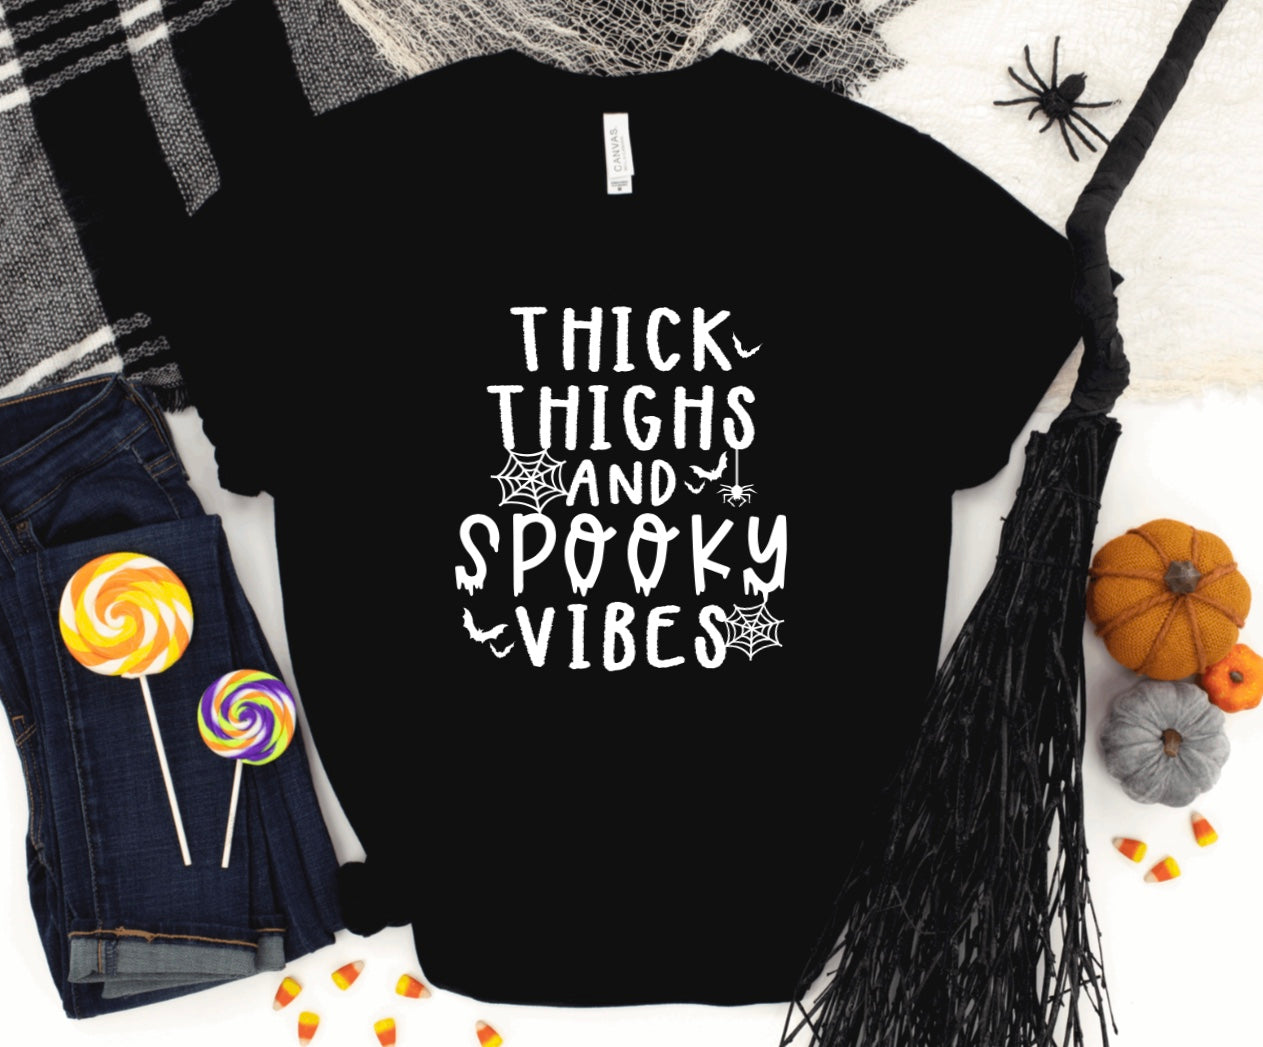 Thick thighs and spooky vibes t-shirt 